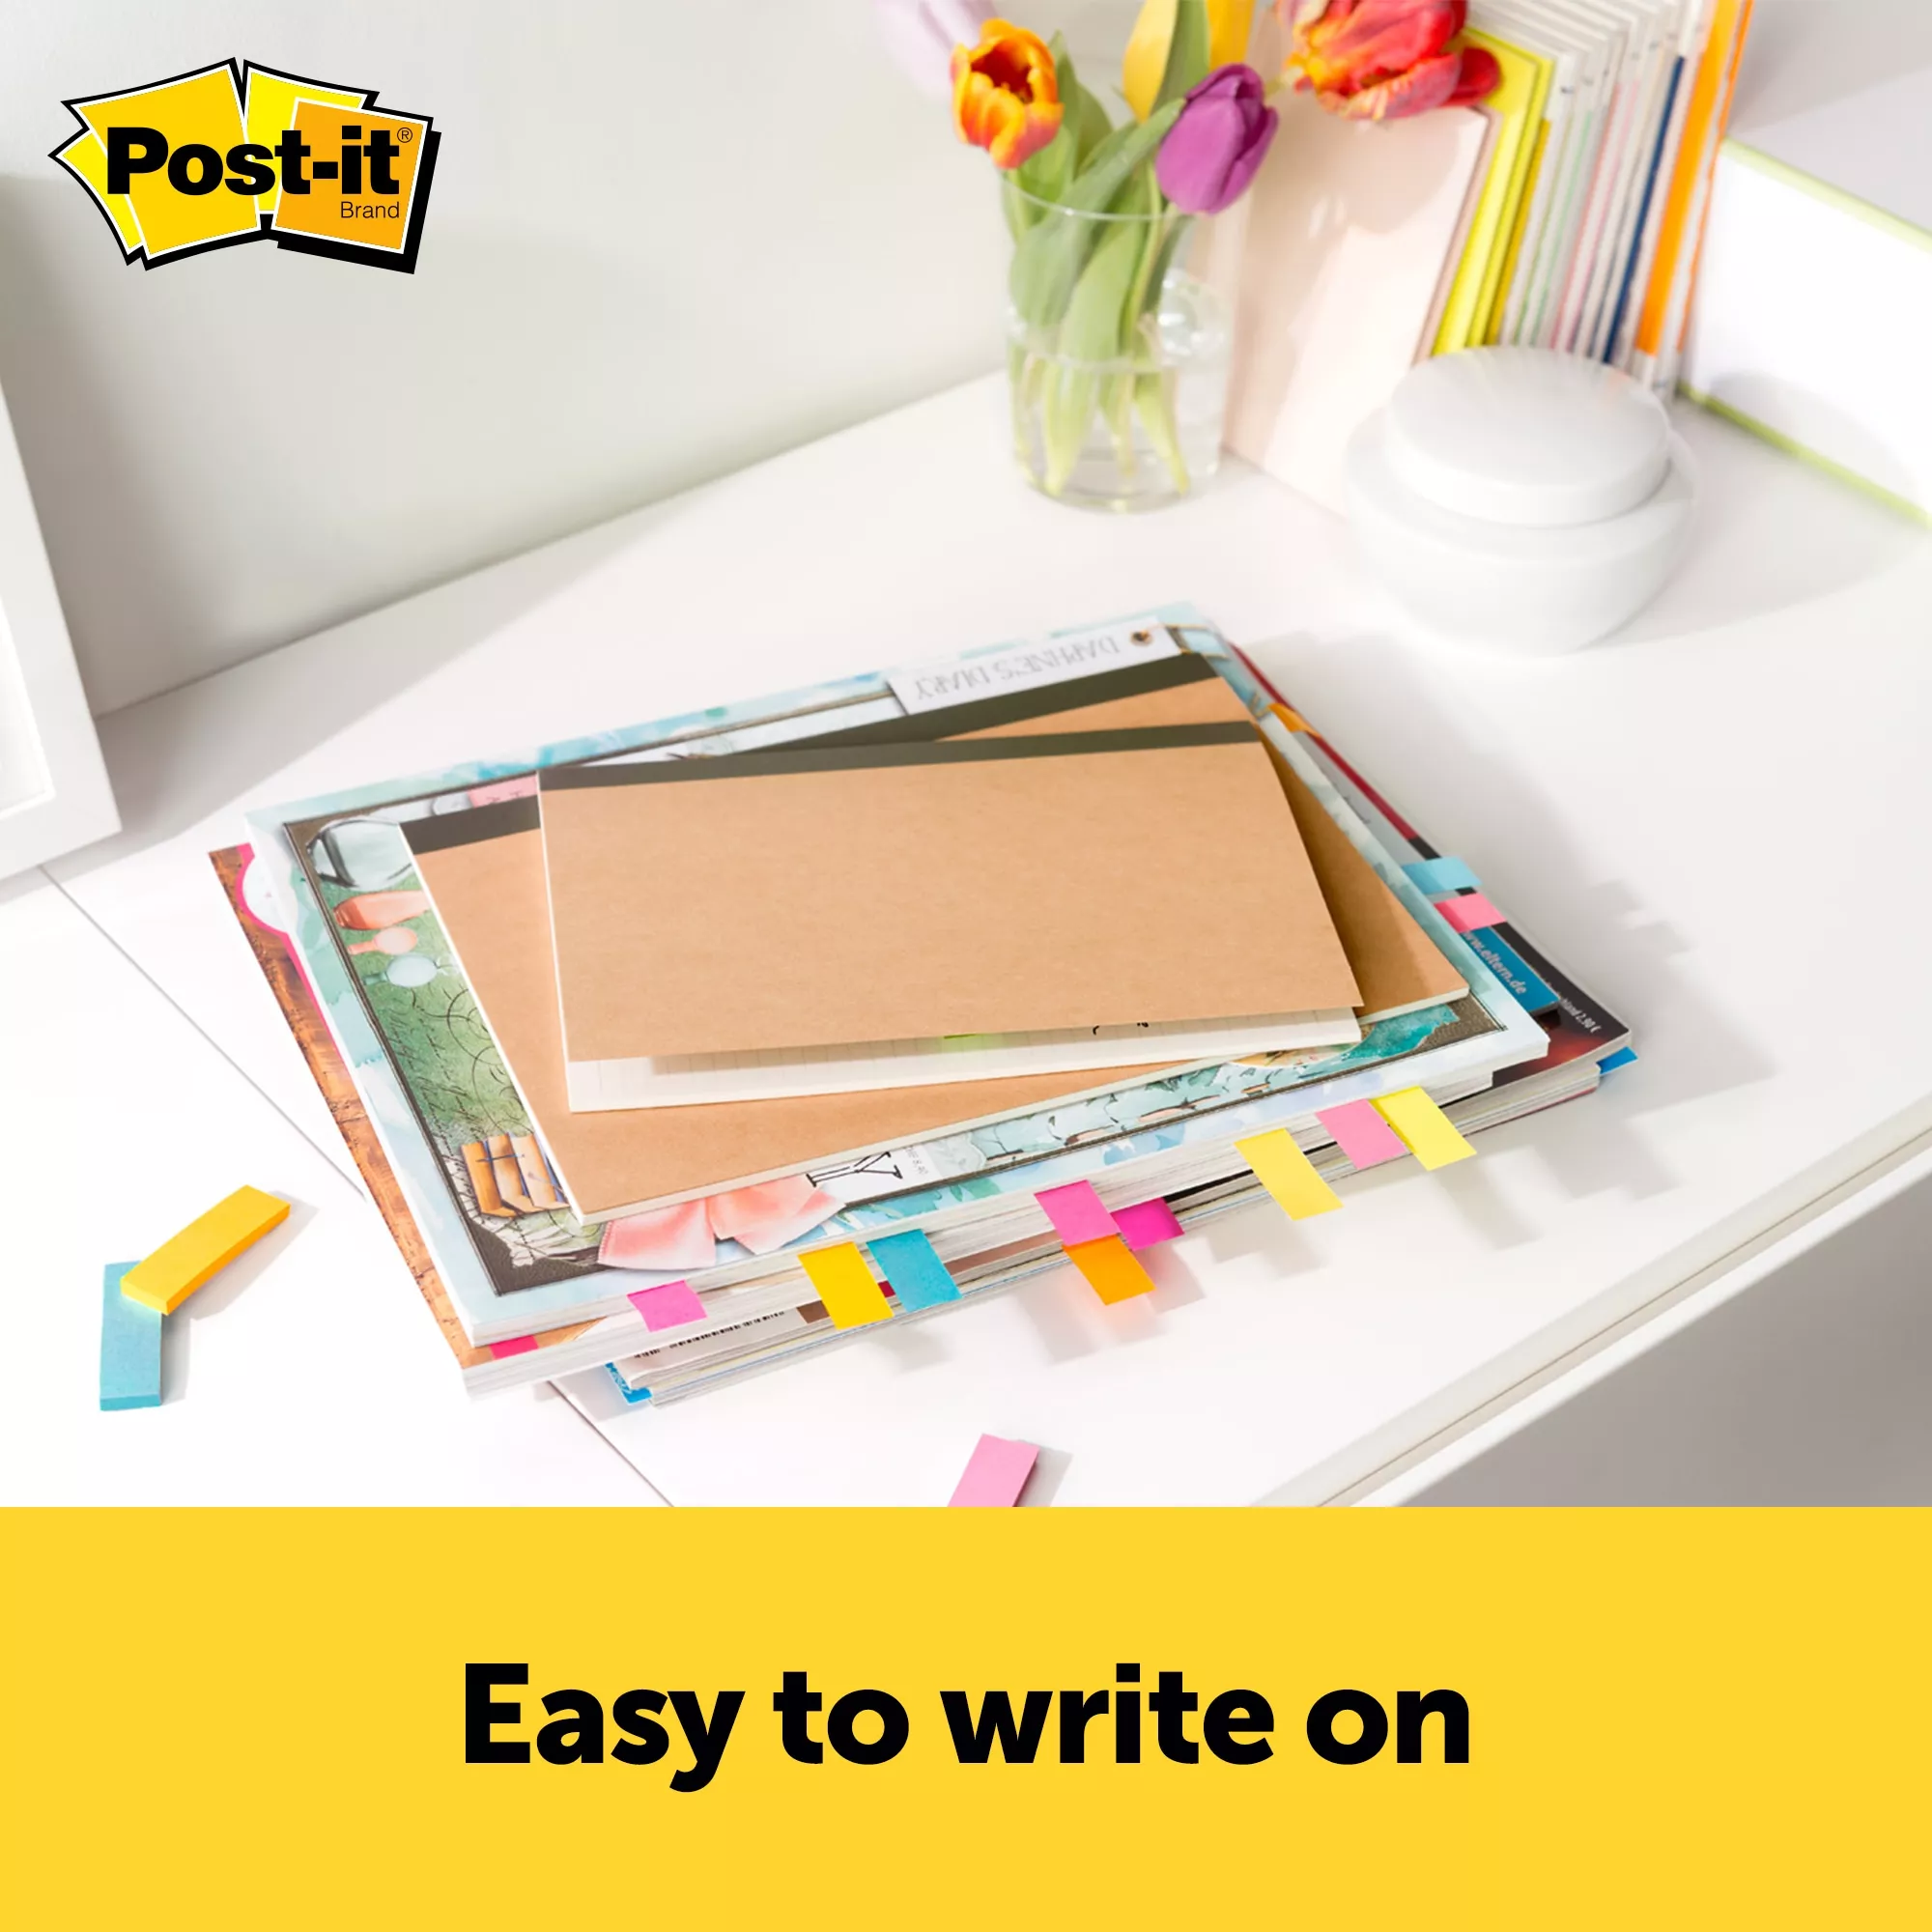 SKU 7100247678 | Post-it® Page Markers 670-5AN